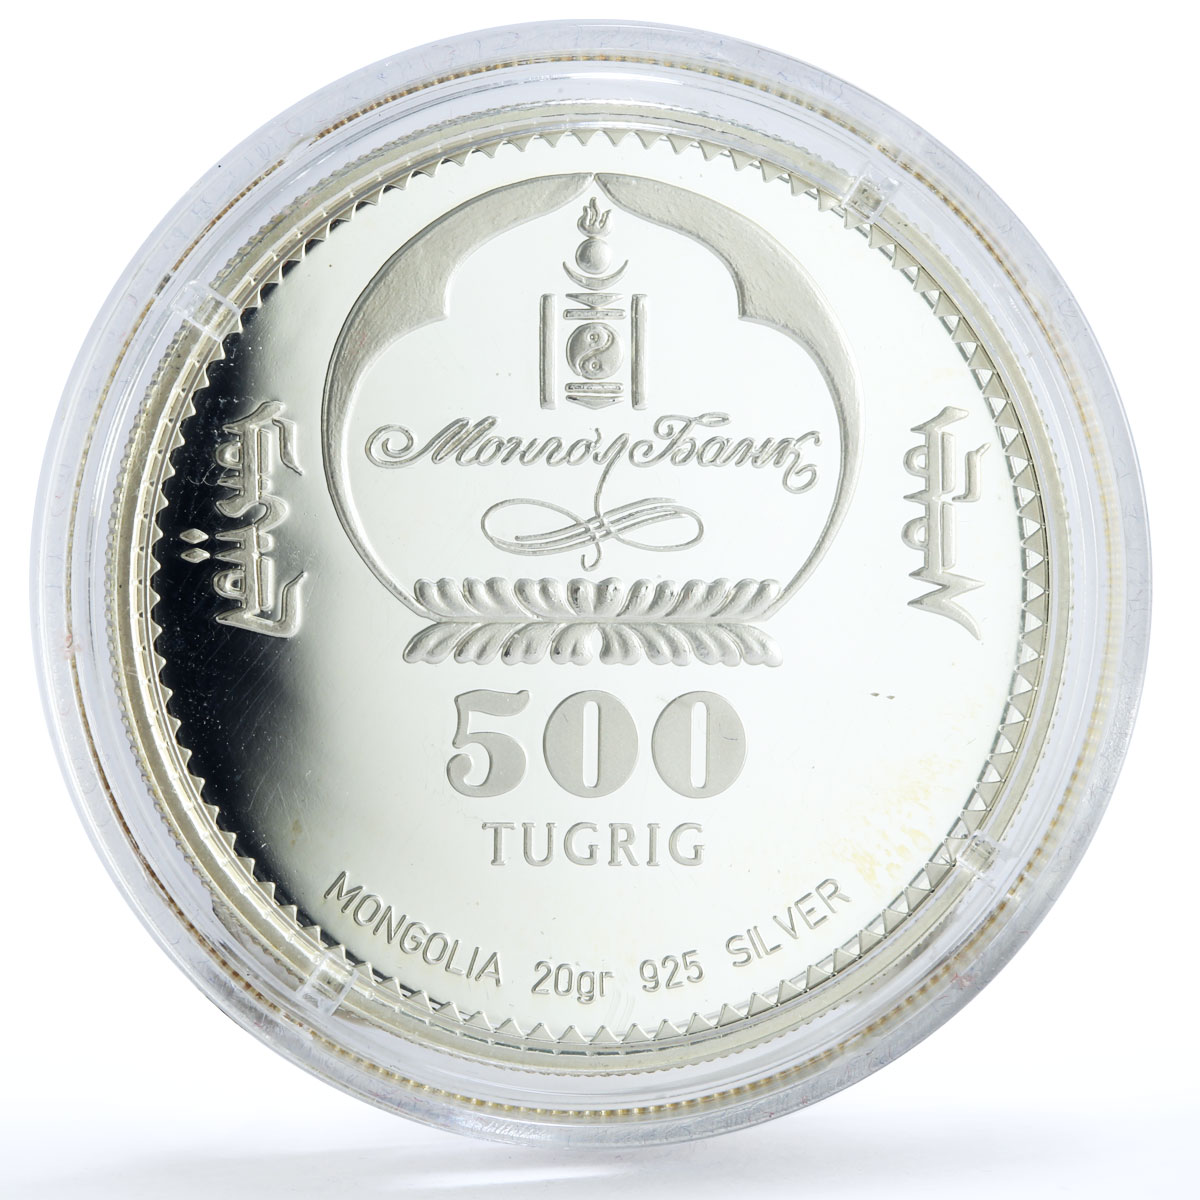 Mongolia 500 togrog Albertville Olympic Games Speed Skating silver coin 2005